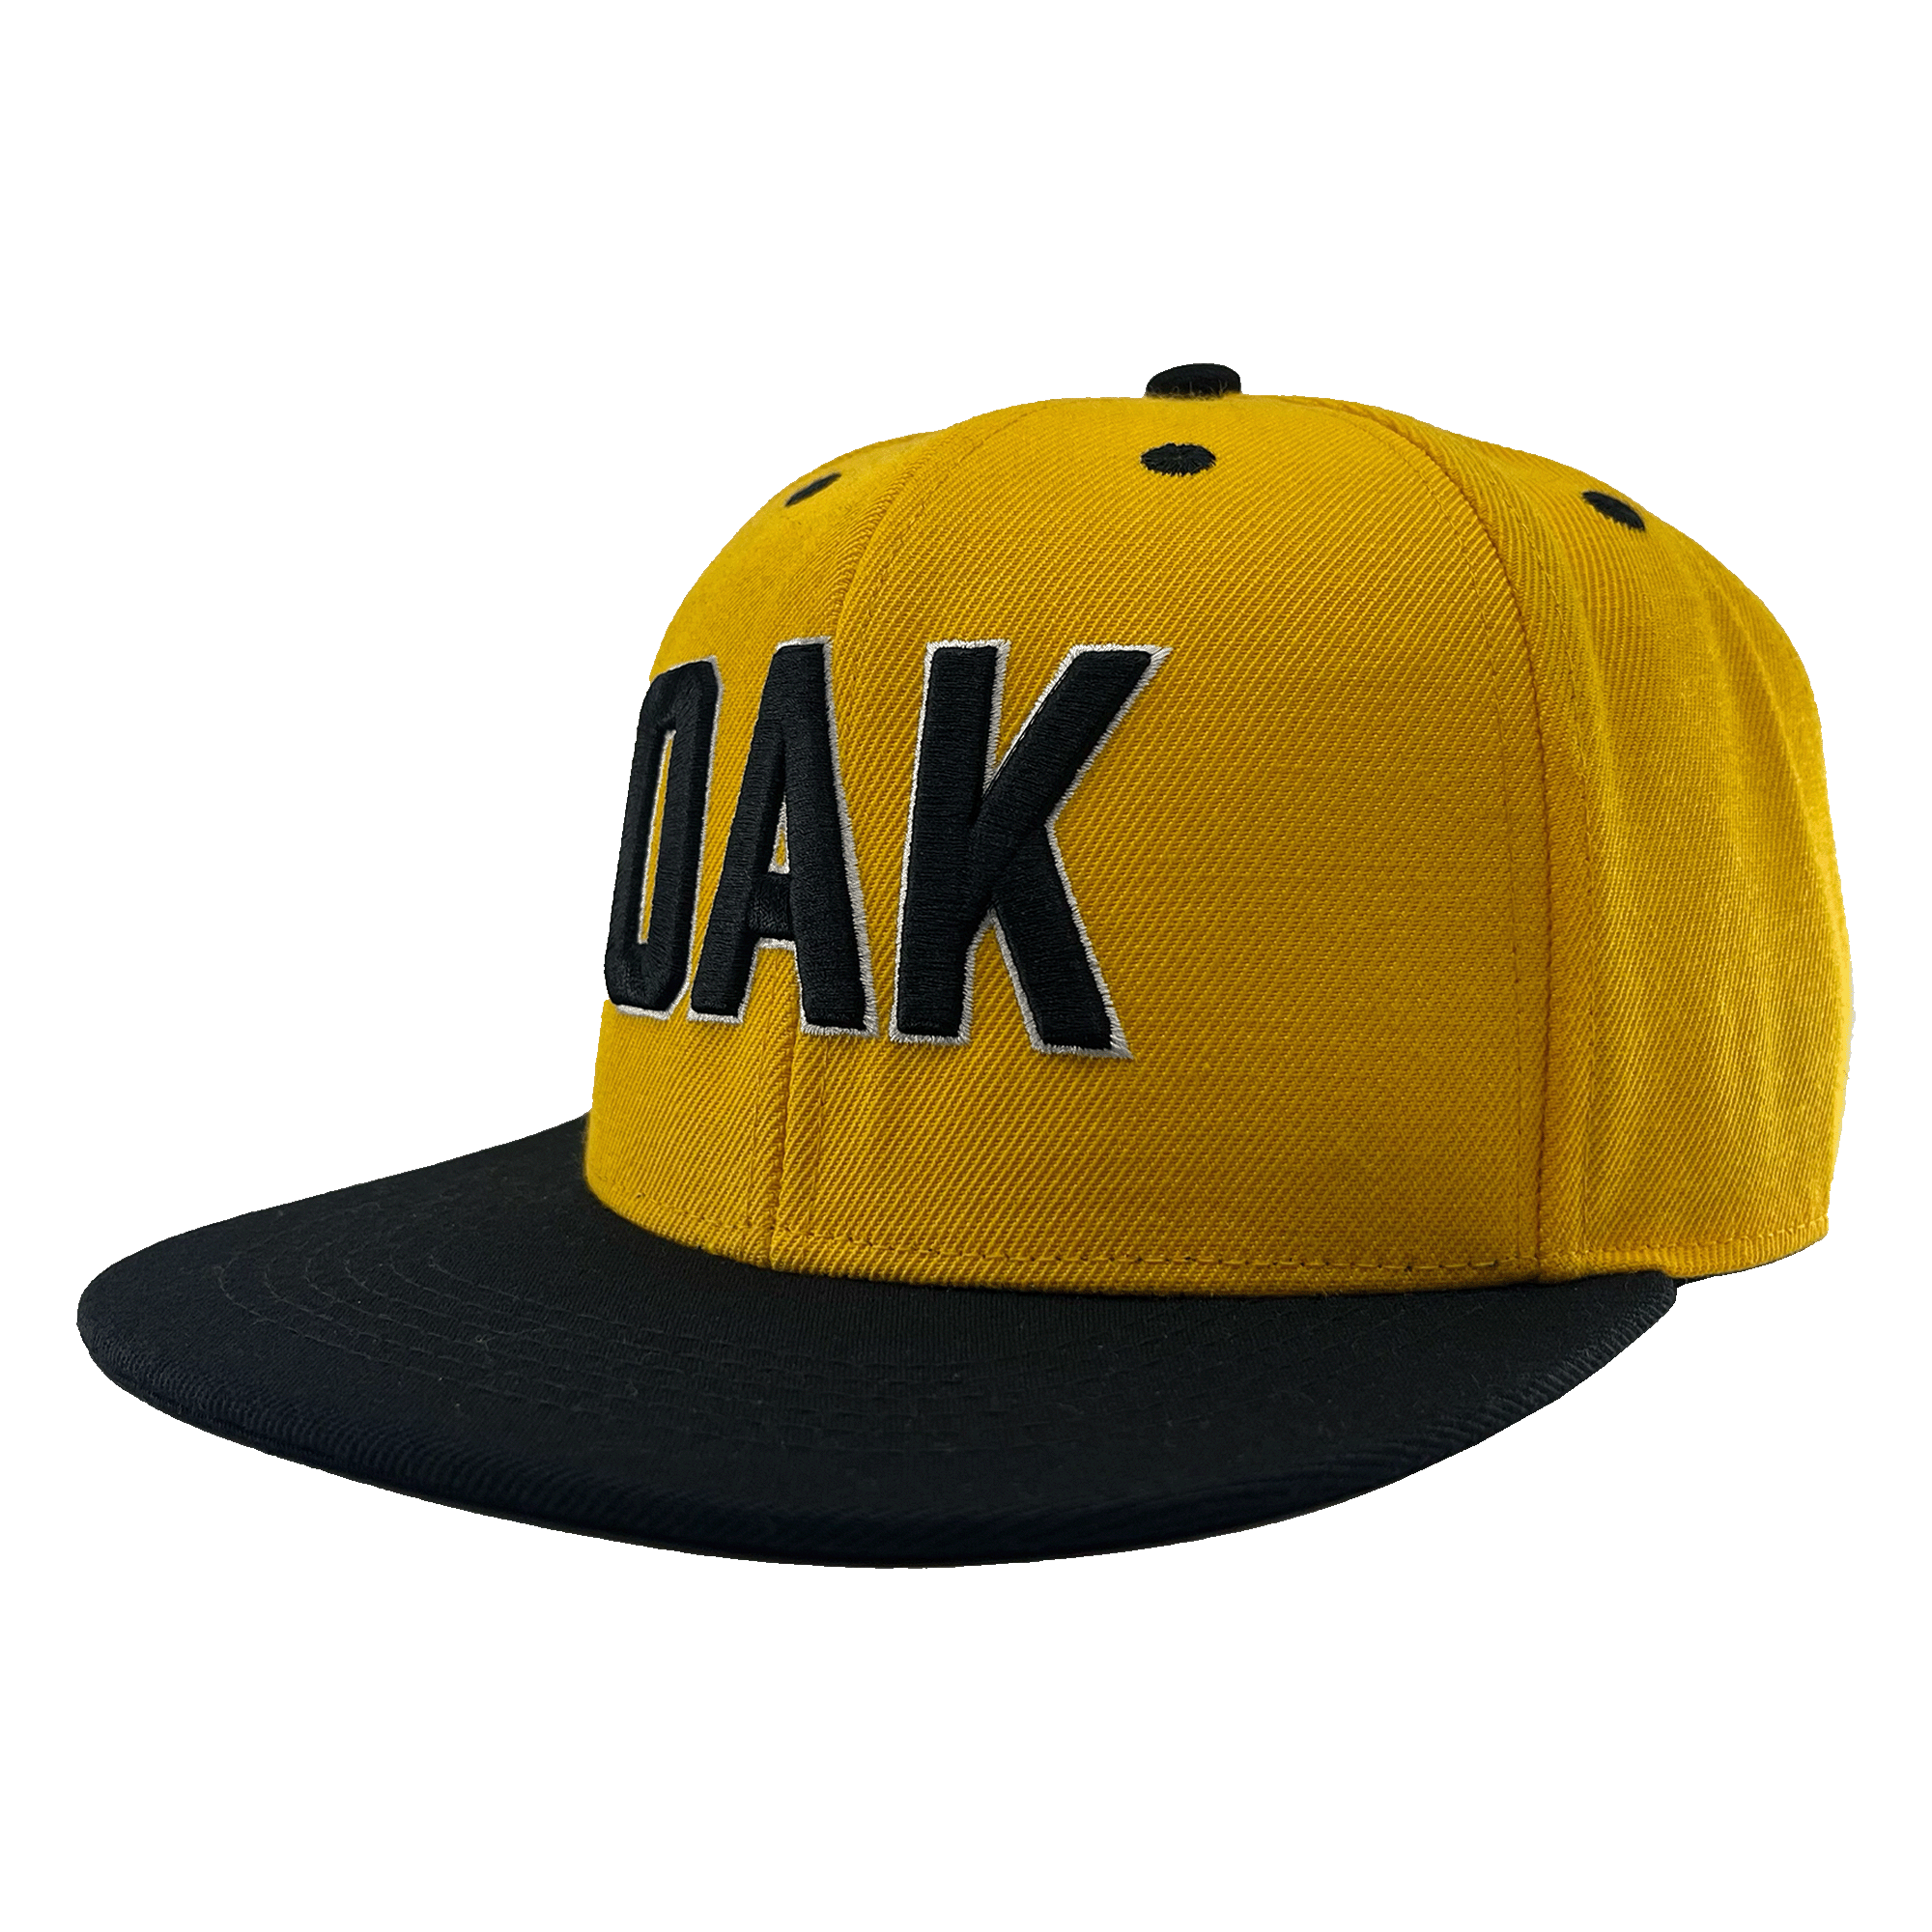 Angled side view of a yellow hat with a black flat bill, black embroidered details, and embroidered OAK block text on the front crown.